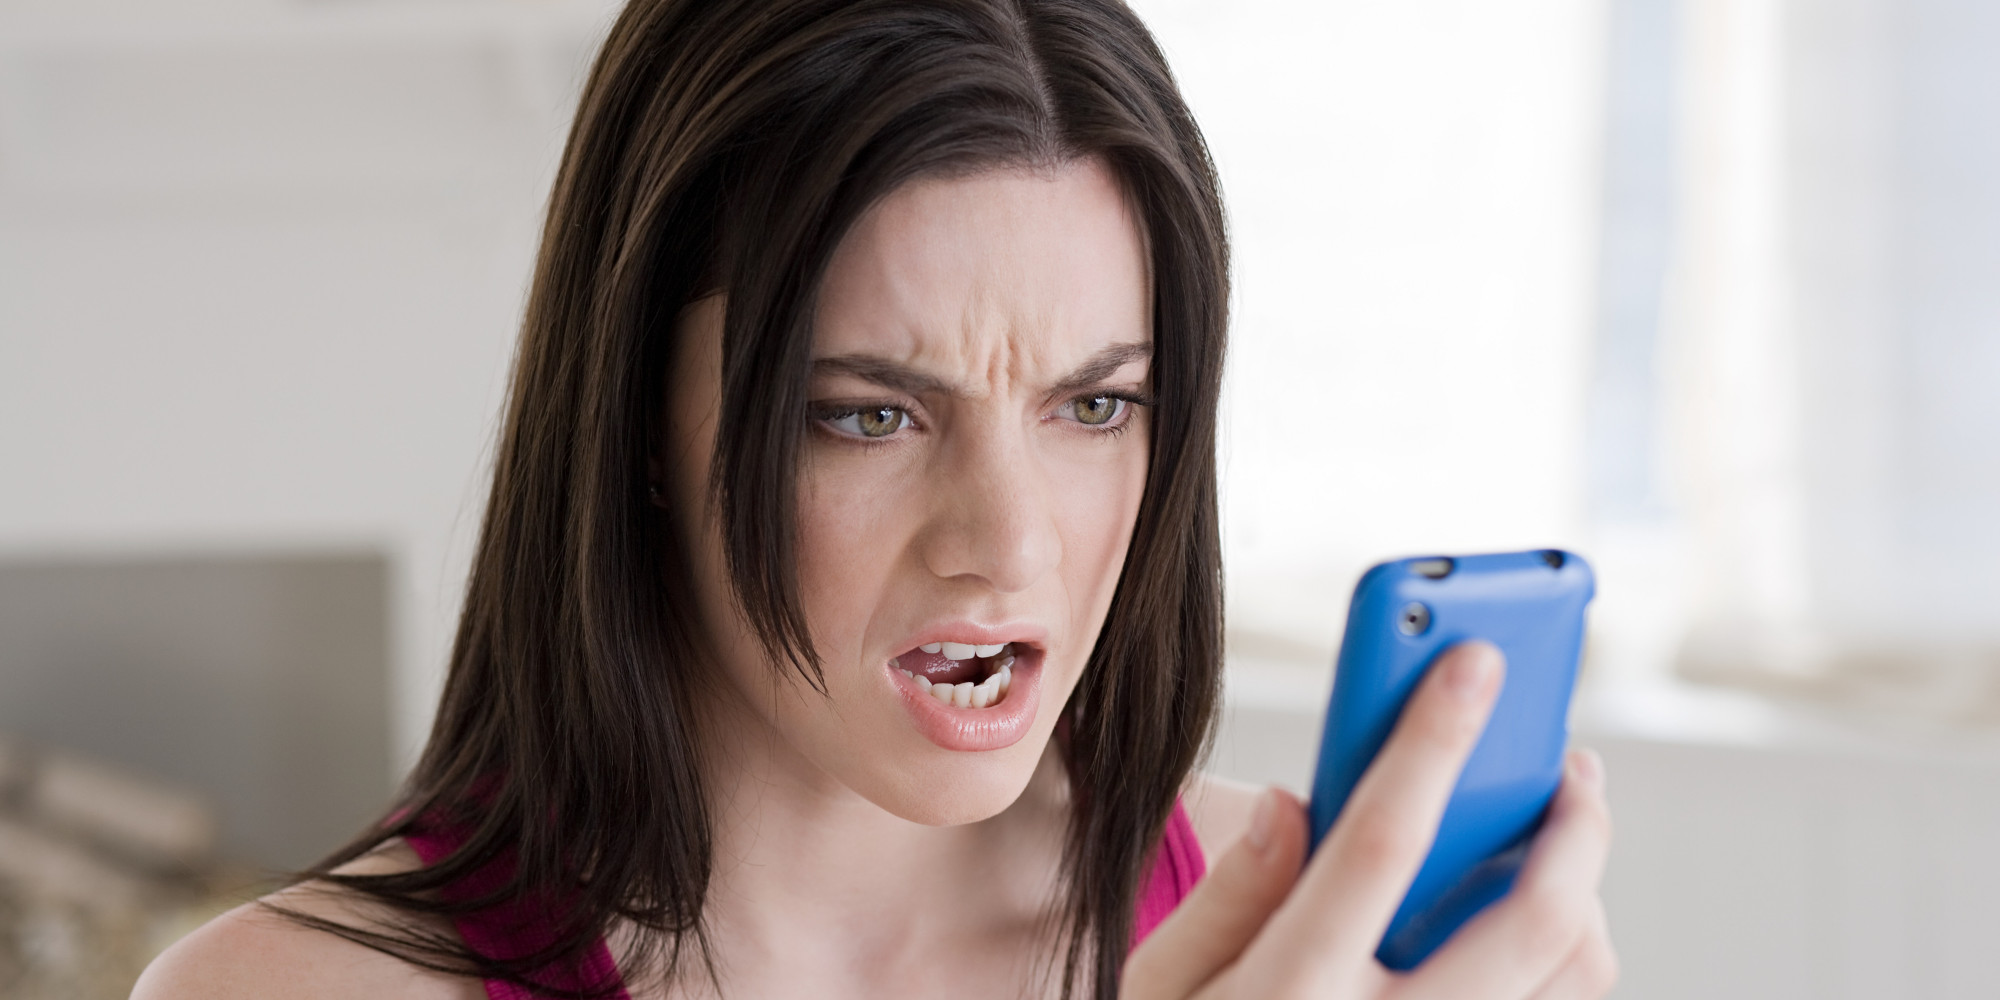 Are You More of an Introvert or an Extrovert? Angry woman looking at cellphone